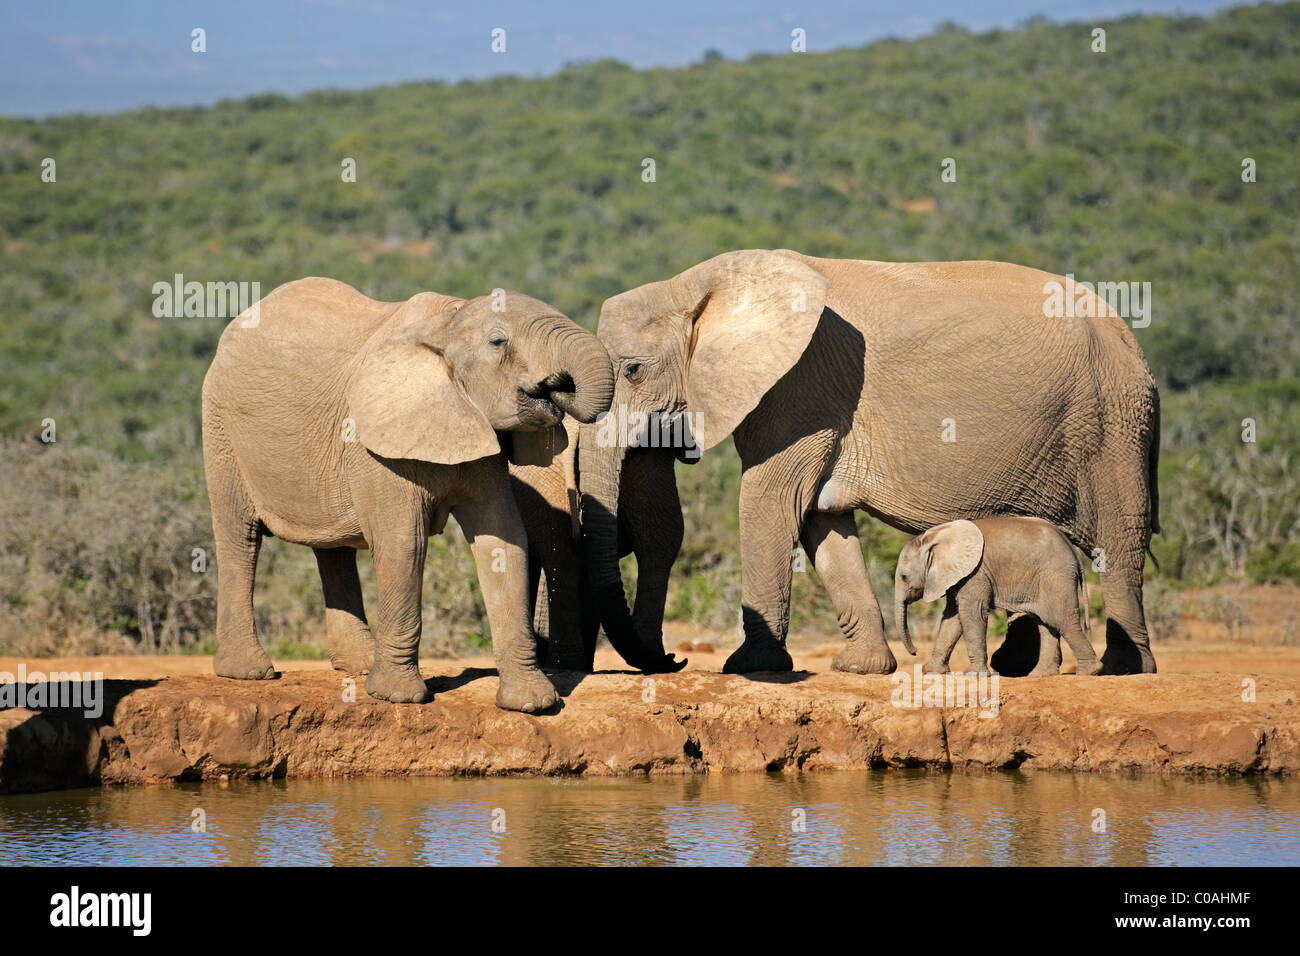 African elephants (Loxodonta africana) drinking water at a waterhole, Addo Elephant park, South Africa Stock Photo